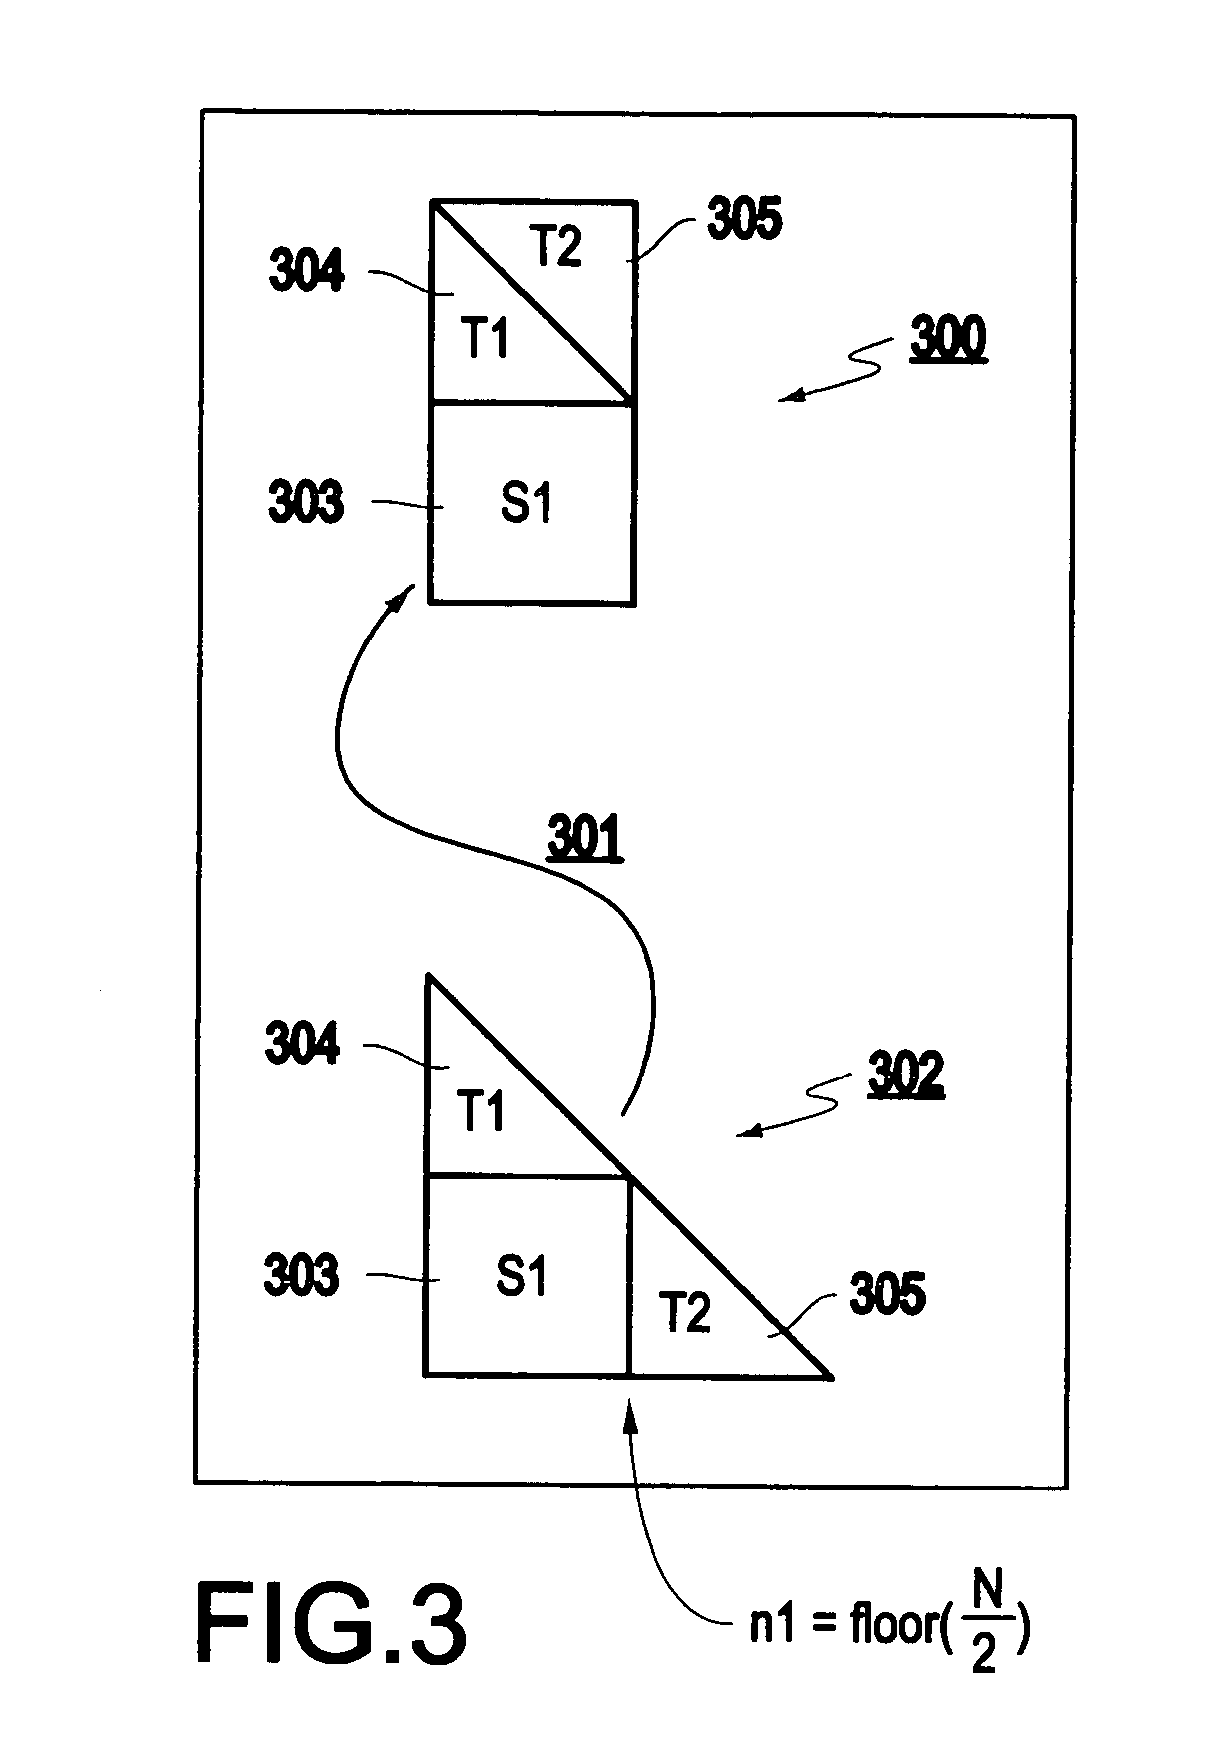 Method and structure for a hybrid full-packed storage format as a single rectangular format data structure